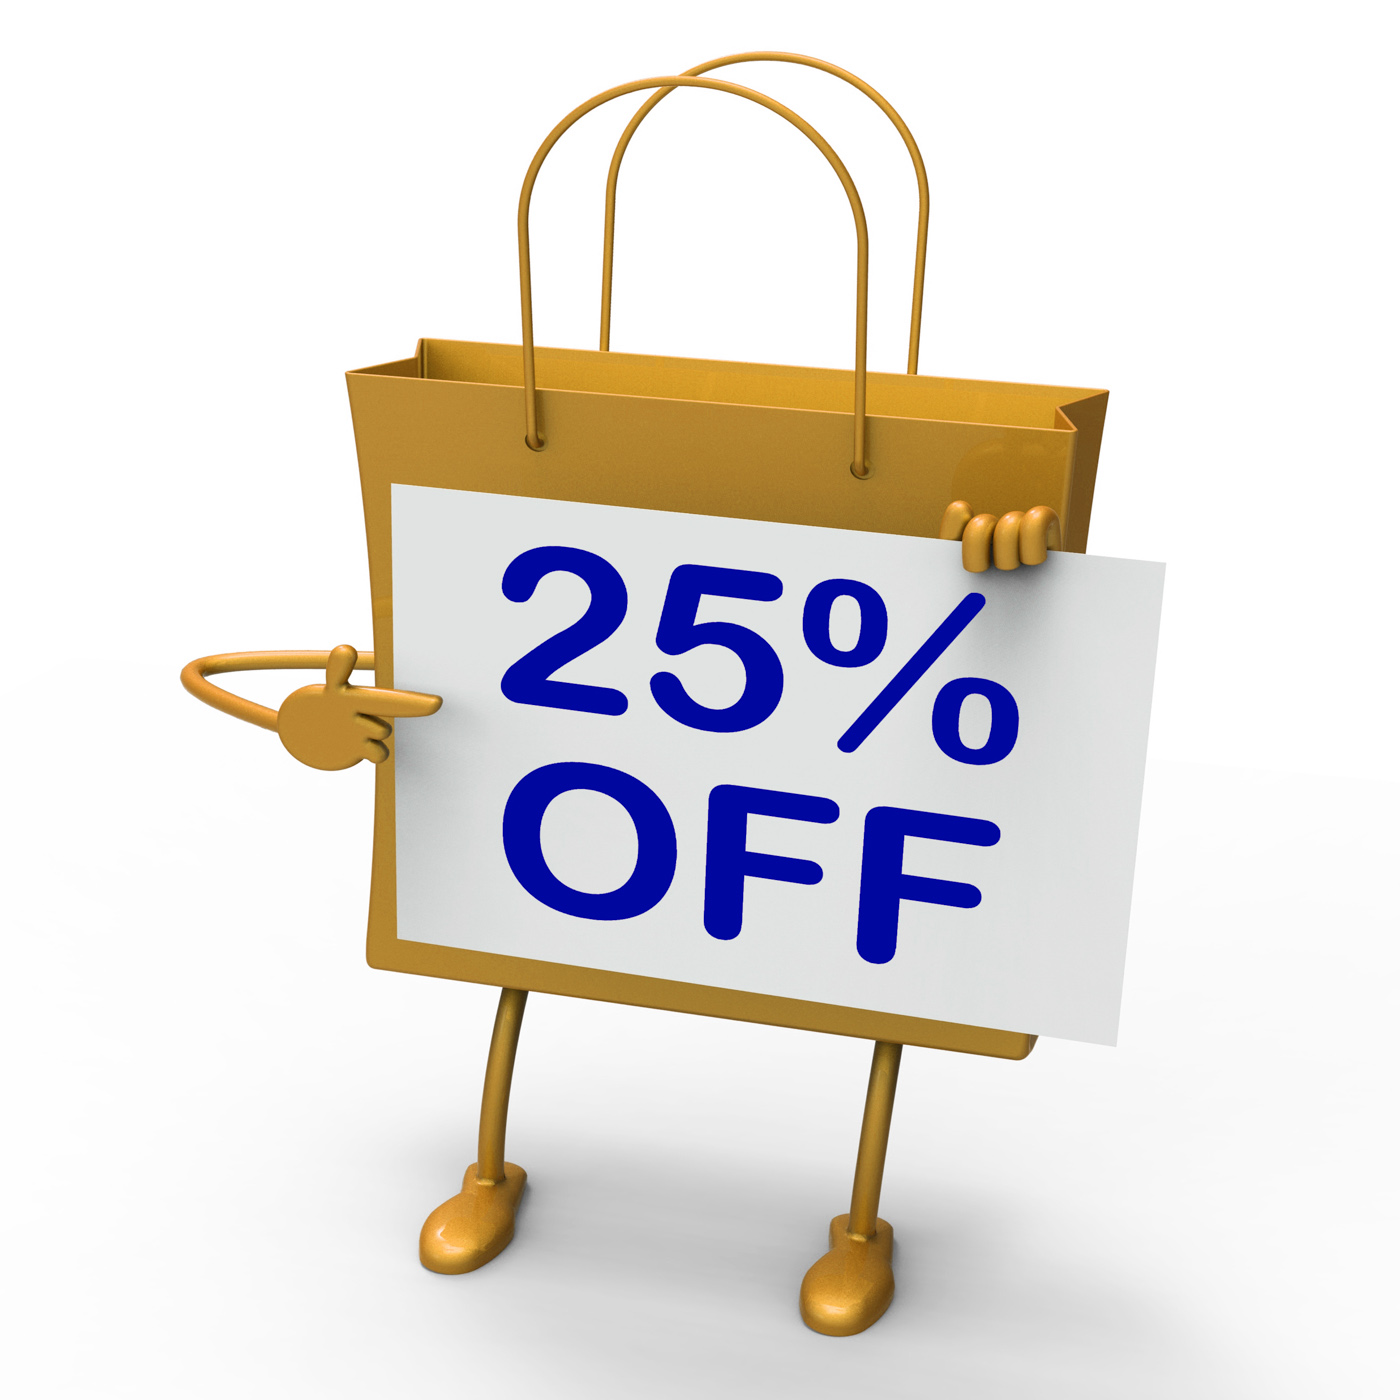 Twenty-five percent reduced on shopping bags shows 25 bargains photo